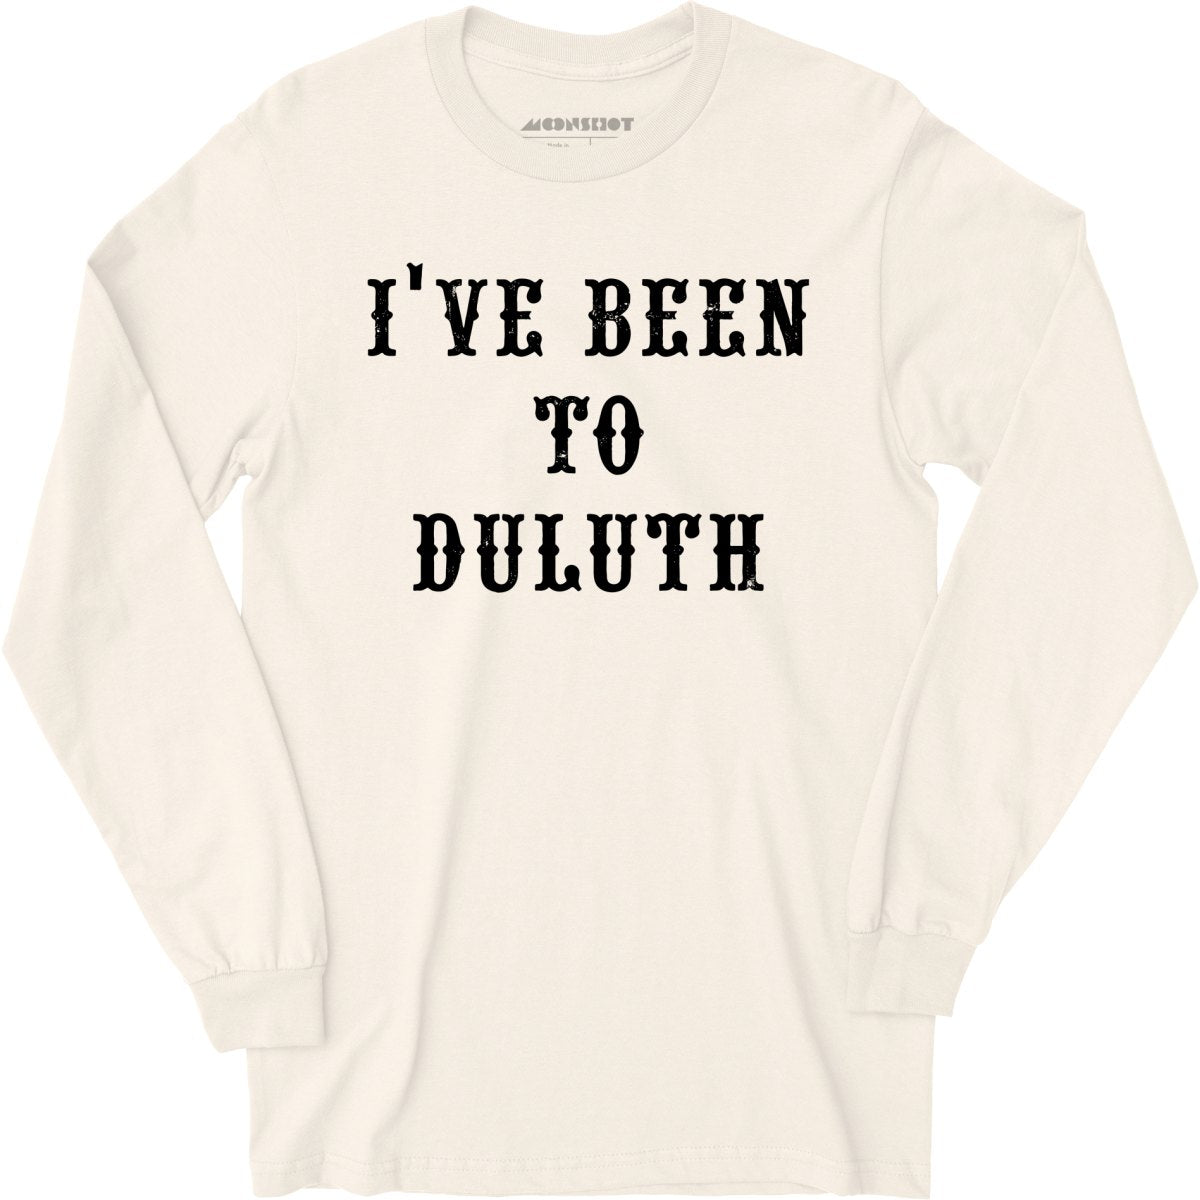 I've Been to Duluth - Long Sleeve T-Shirt